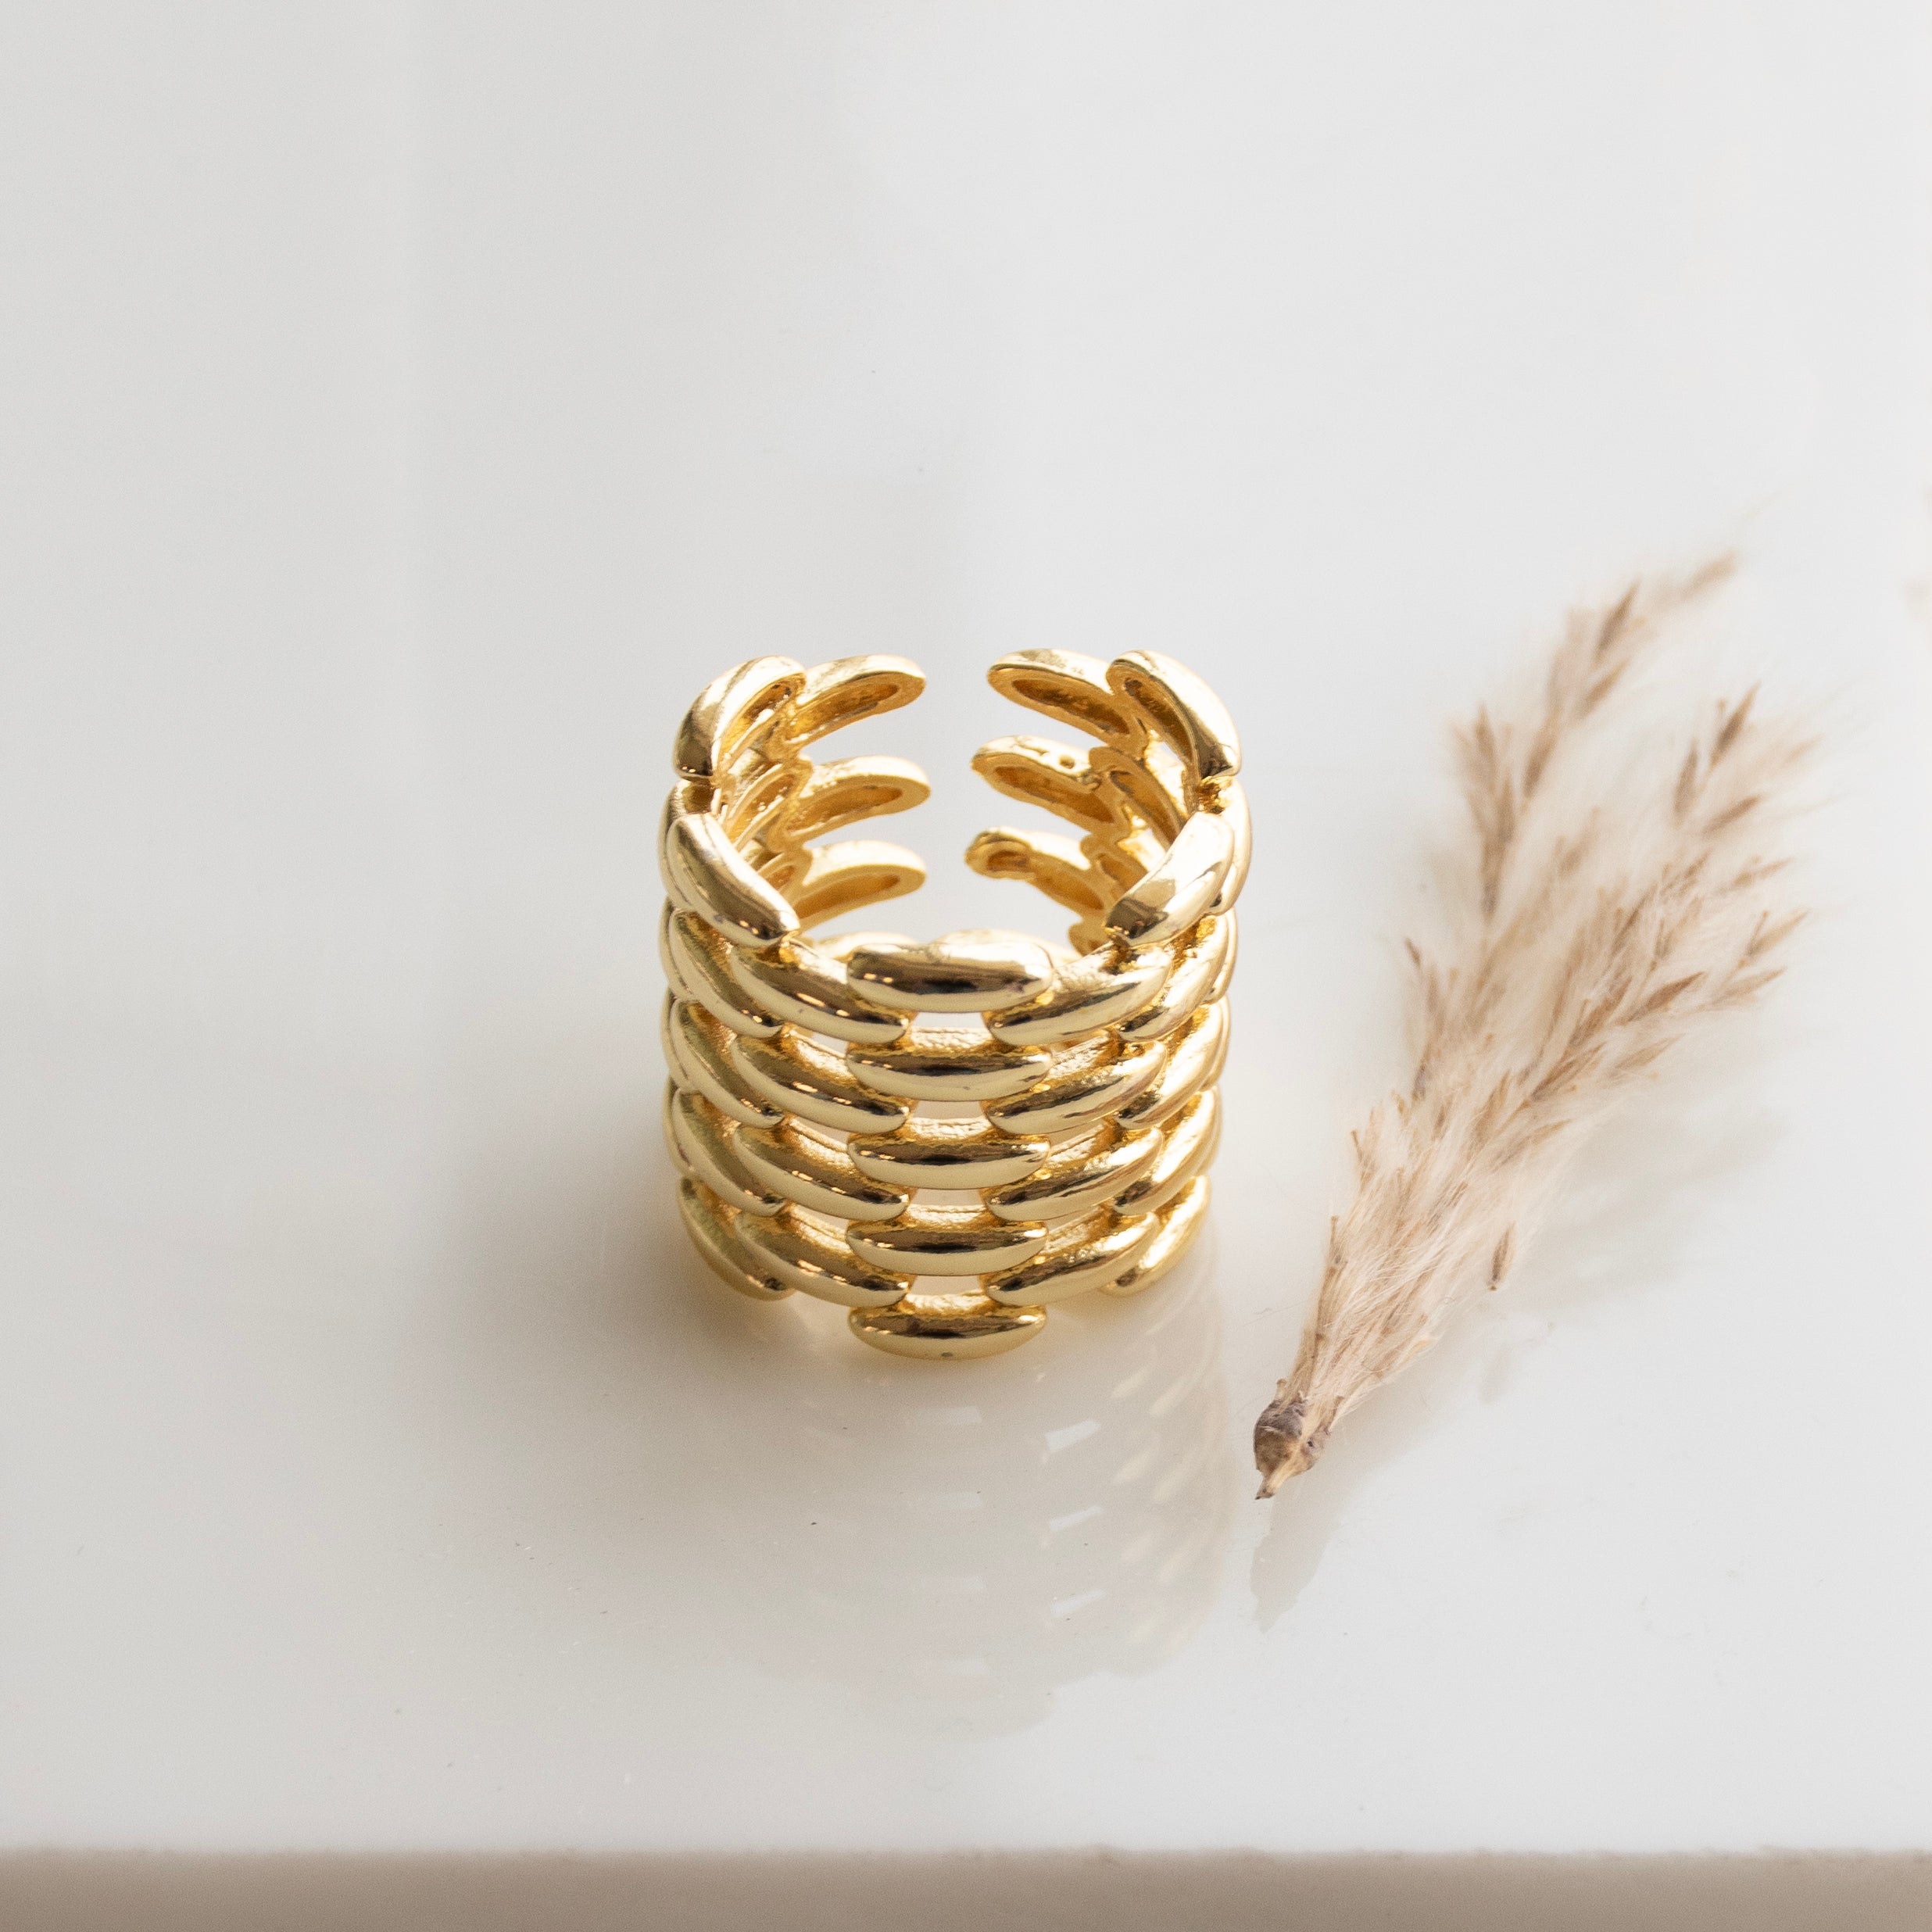 Abstract Spiral Ring